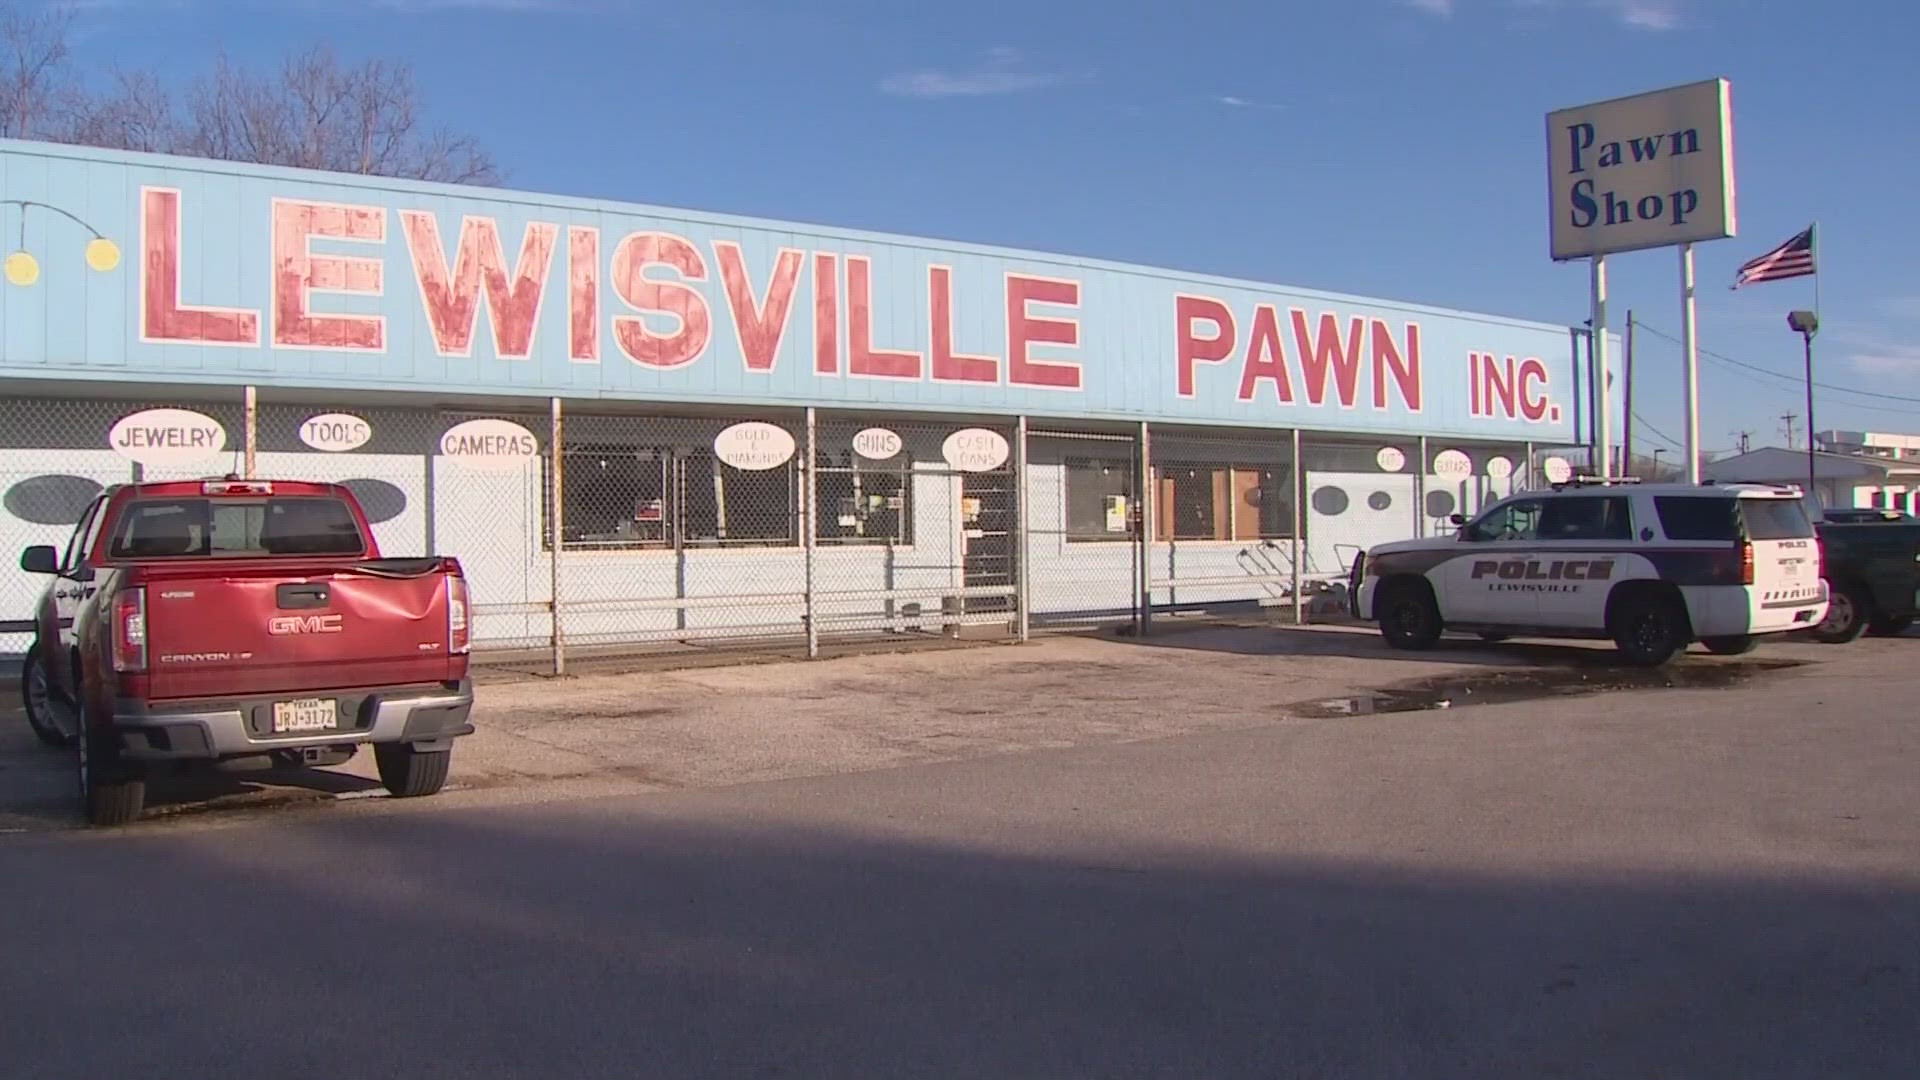 Three suspects are accused in the murder of a beloved pawn shop owner in Lewisville, Texas.